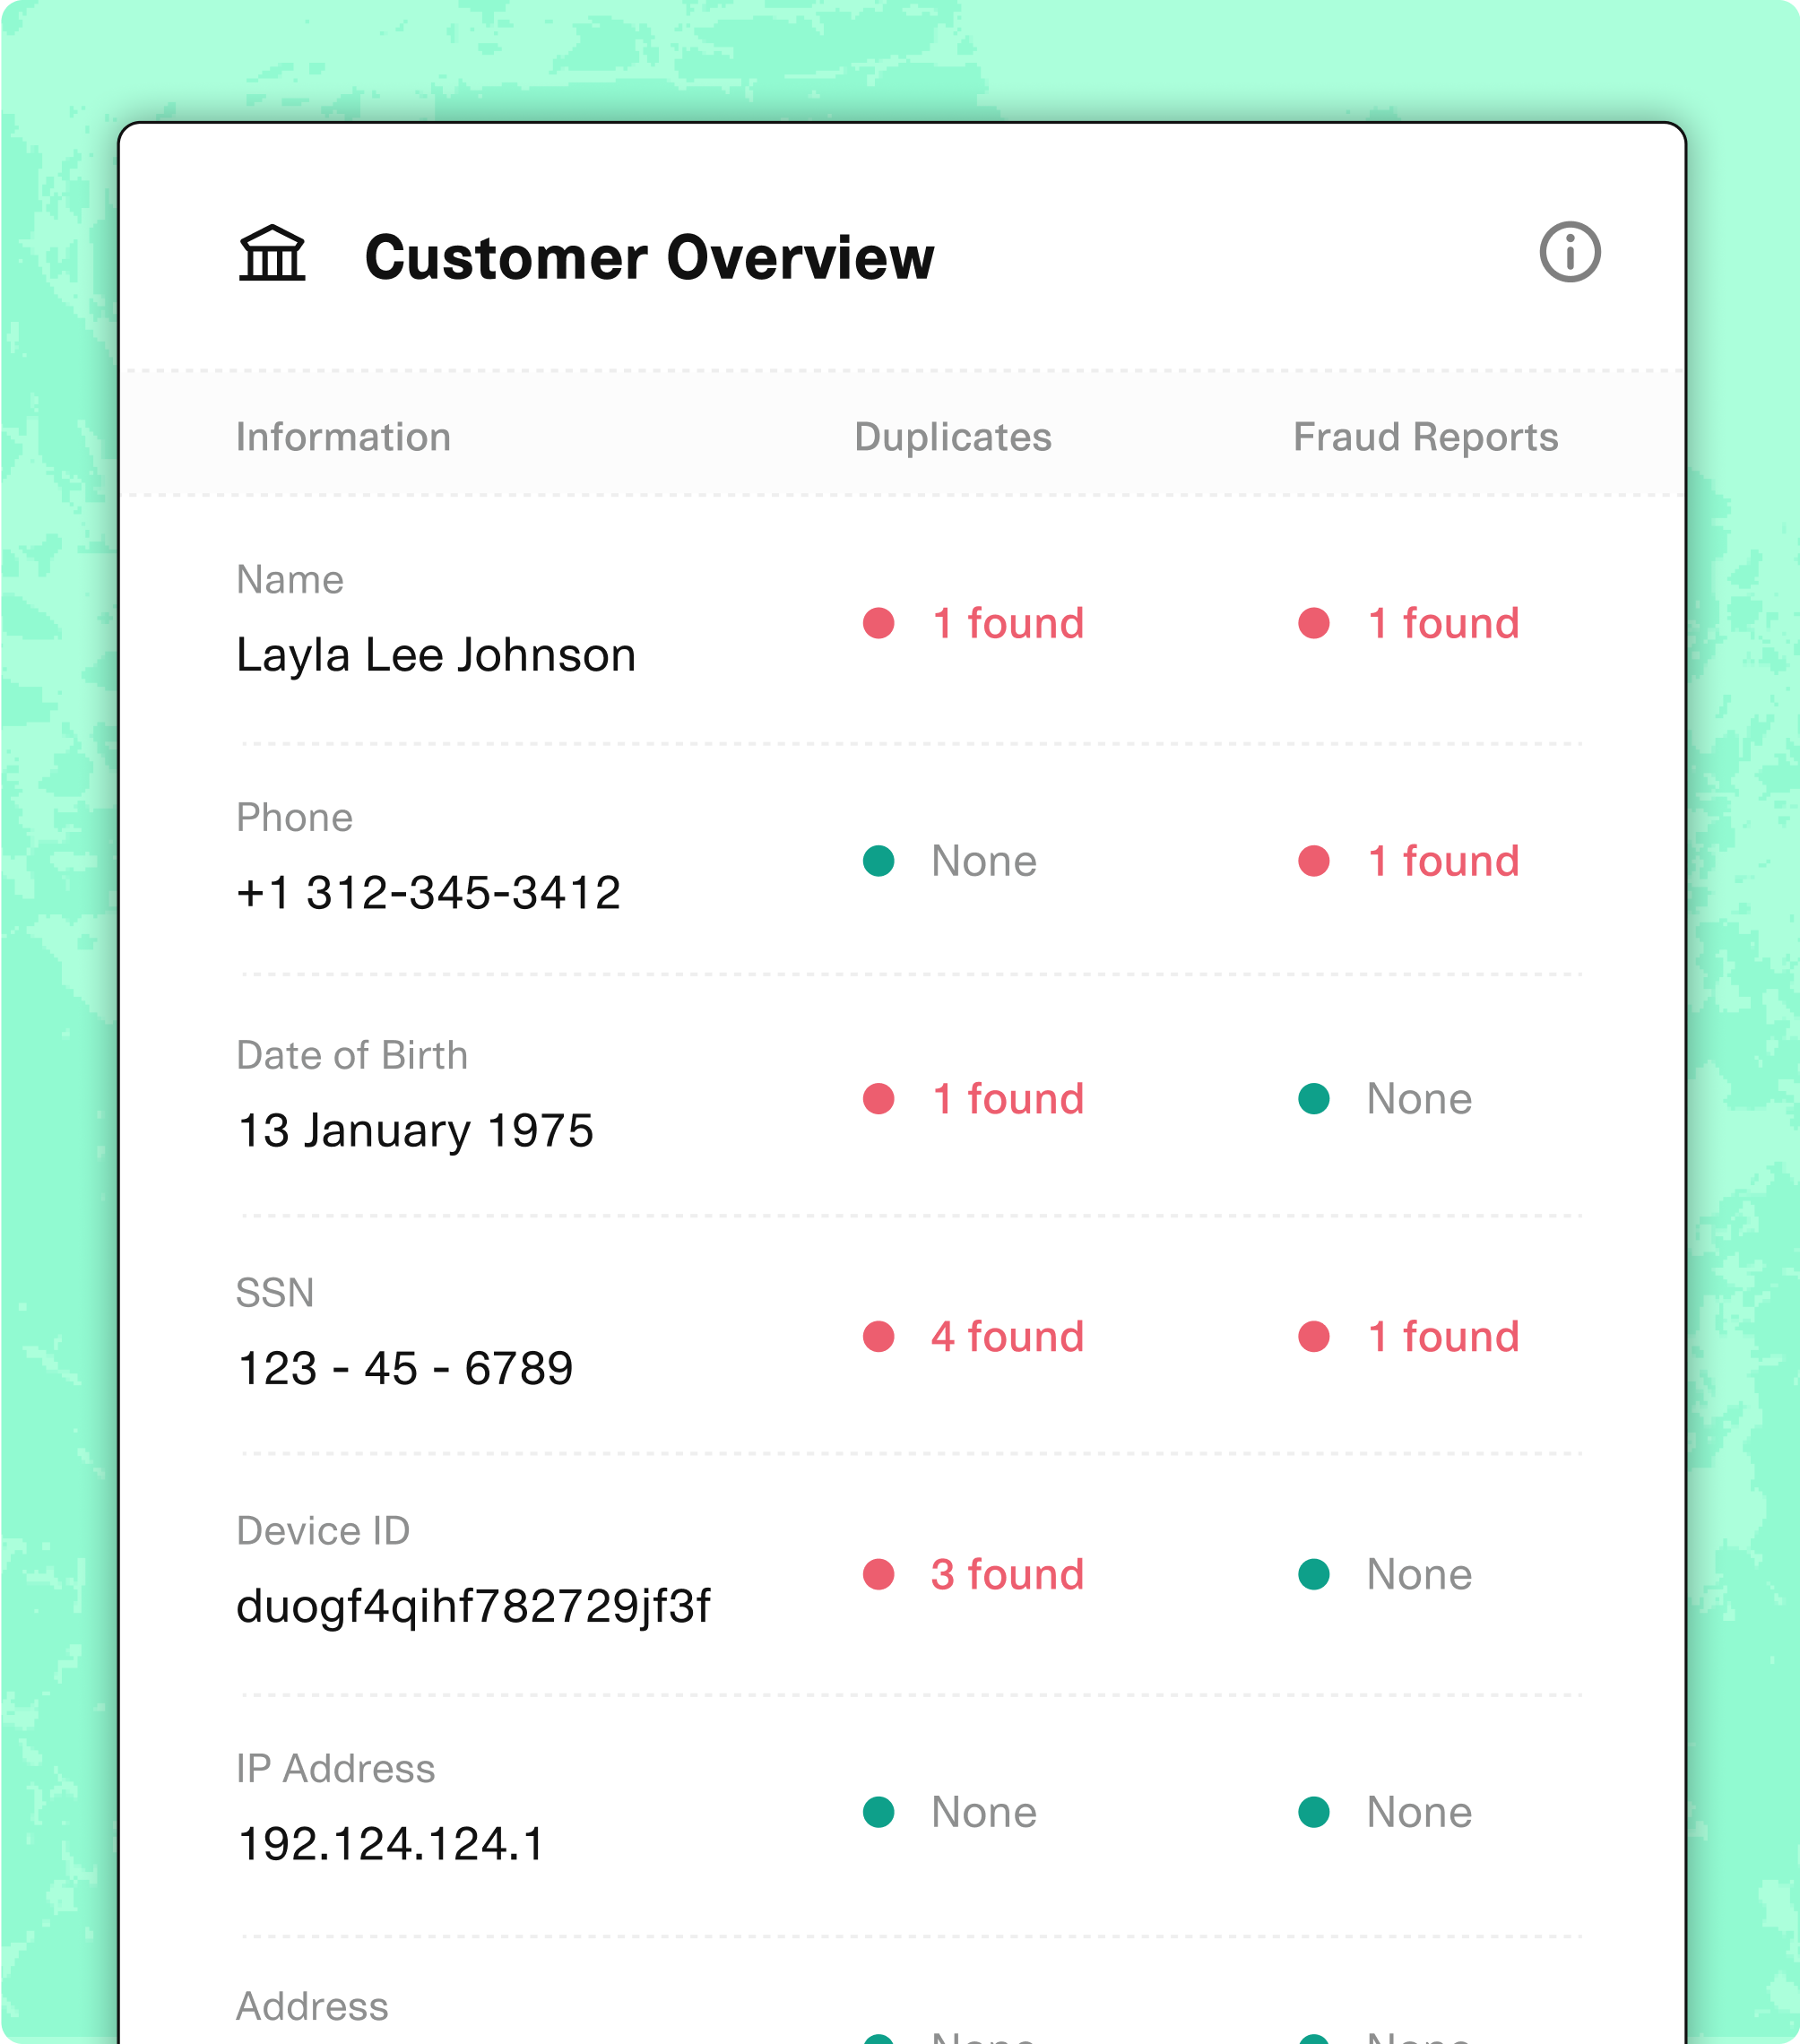 customer overview with how many fraud reports found by category